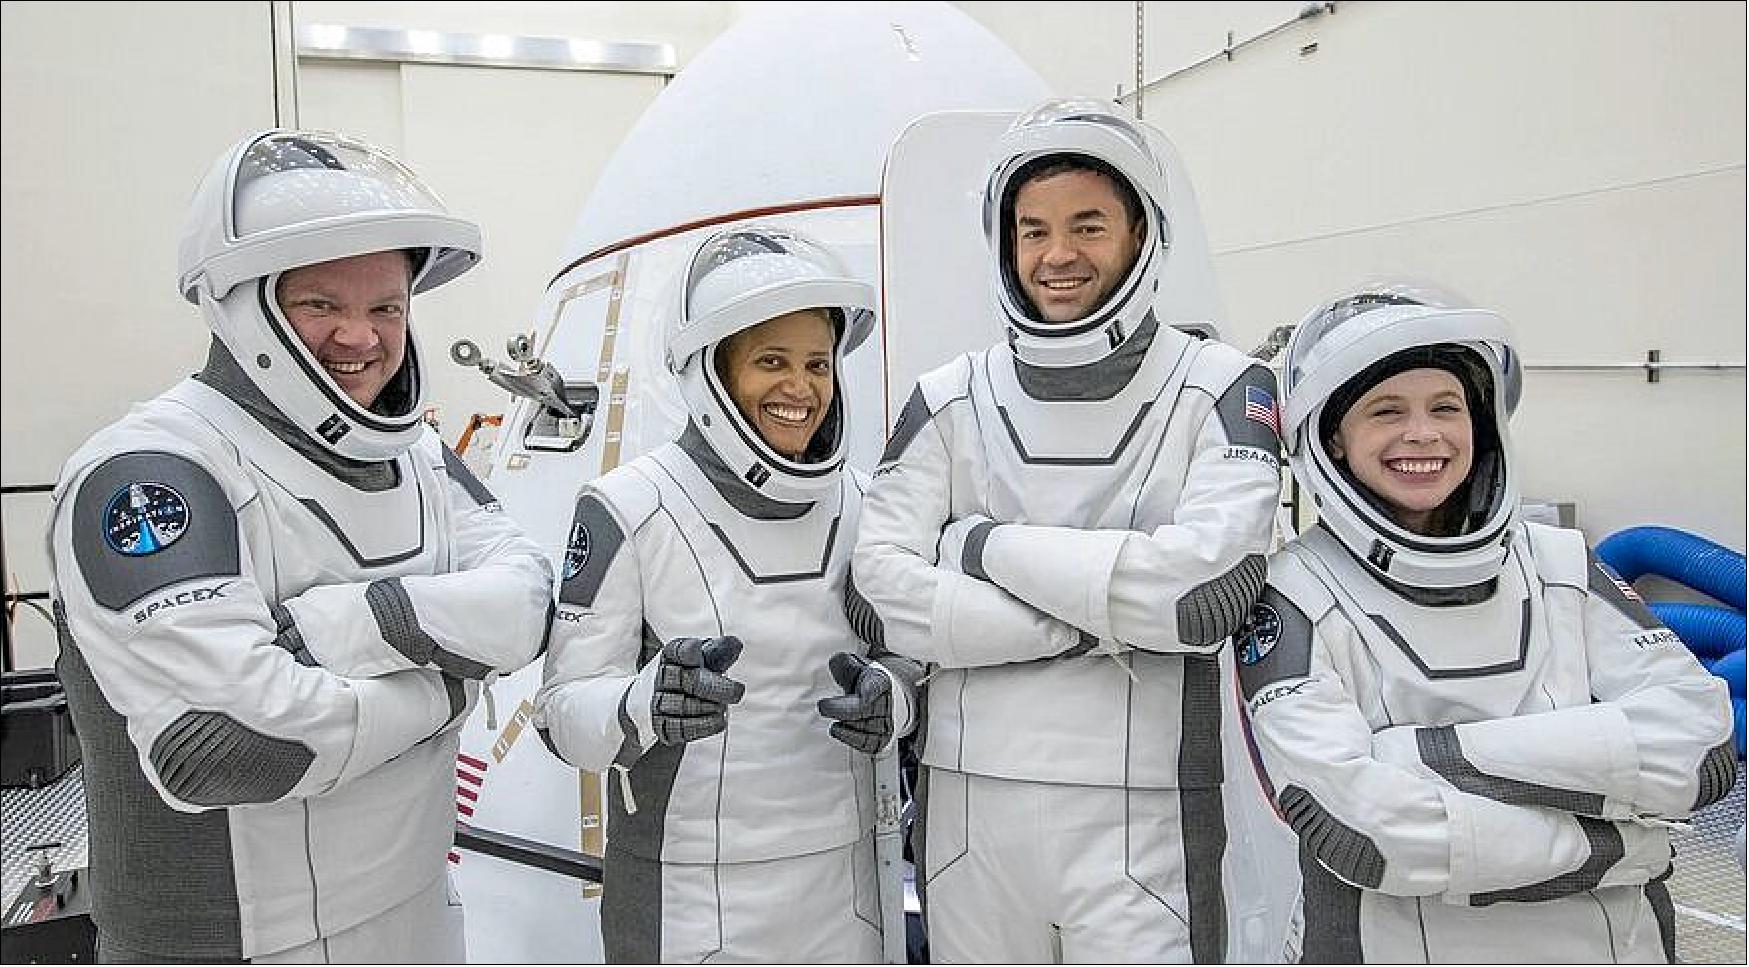 Figure 3: The Inspiration4 crew of (from left) Chris Sembroski, Sian Proctor, Jared Isaacman and Hayley Arceneaux pose with their Crew Dragon spacecraft ahead of their mid-September launch (image credit: Inspiration4)